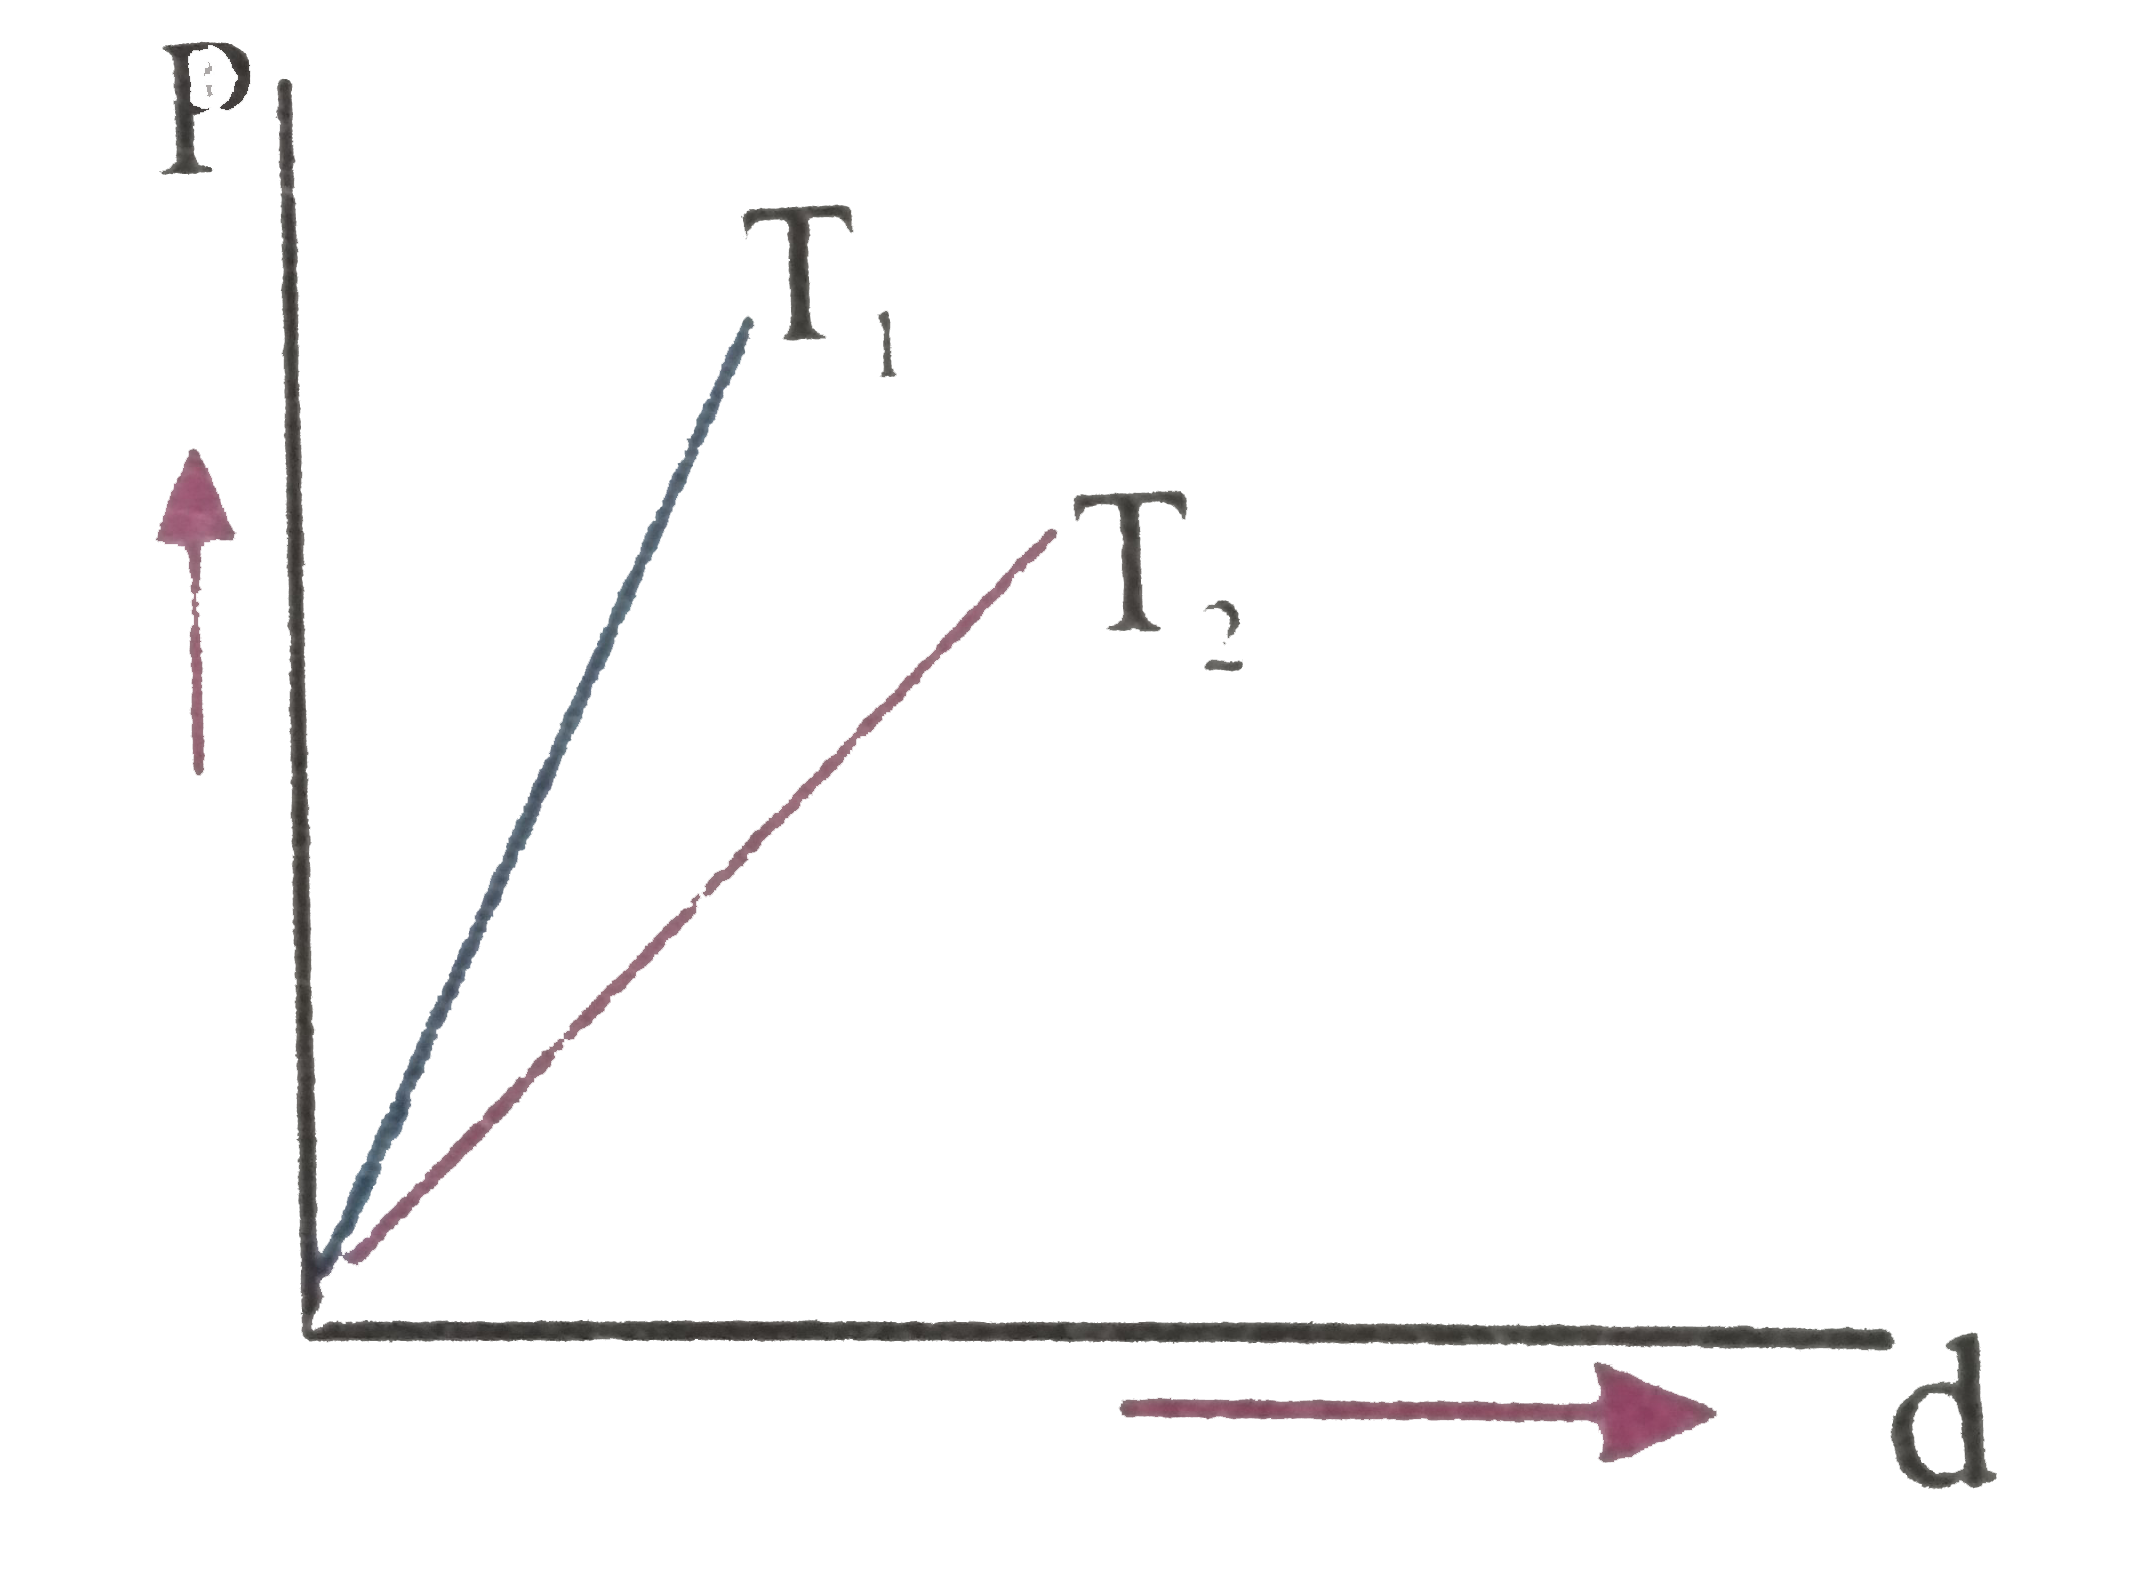 In Boyles experiment for a given gas at different temperature the graph drawn between pressure and density are straight lines as shown then